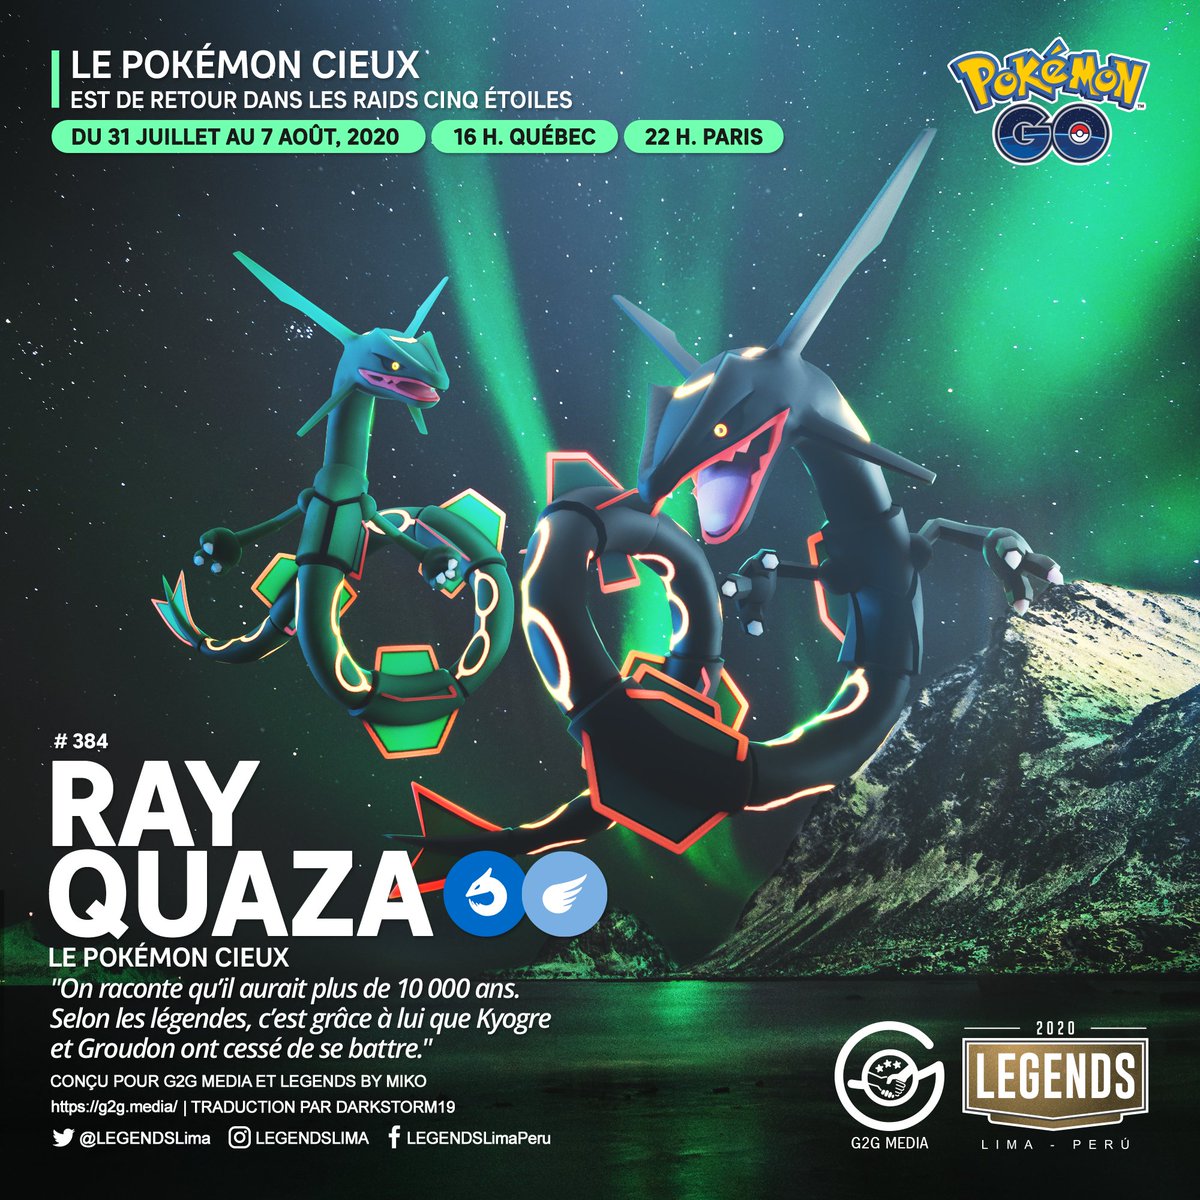 Legends Rayquaza The Sky High Pokemon Returns To Five Star Raids Beginning Today July 31st At 1 P M Pdt Until August 7th At 1 P M Pdt Good Luck